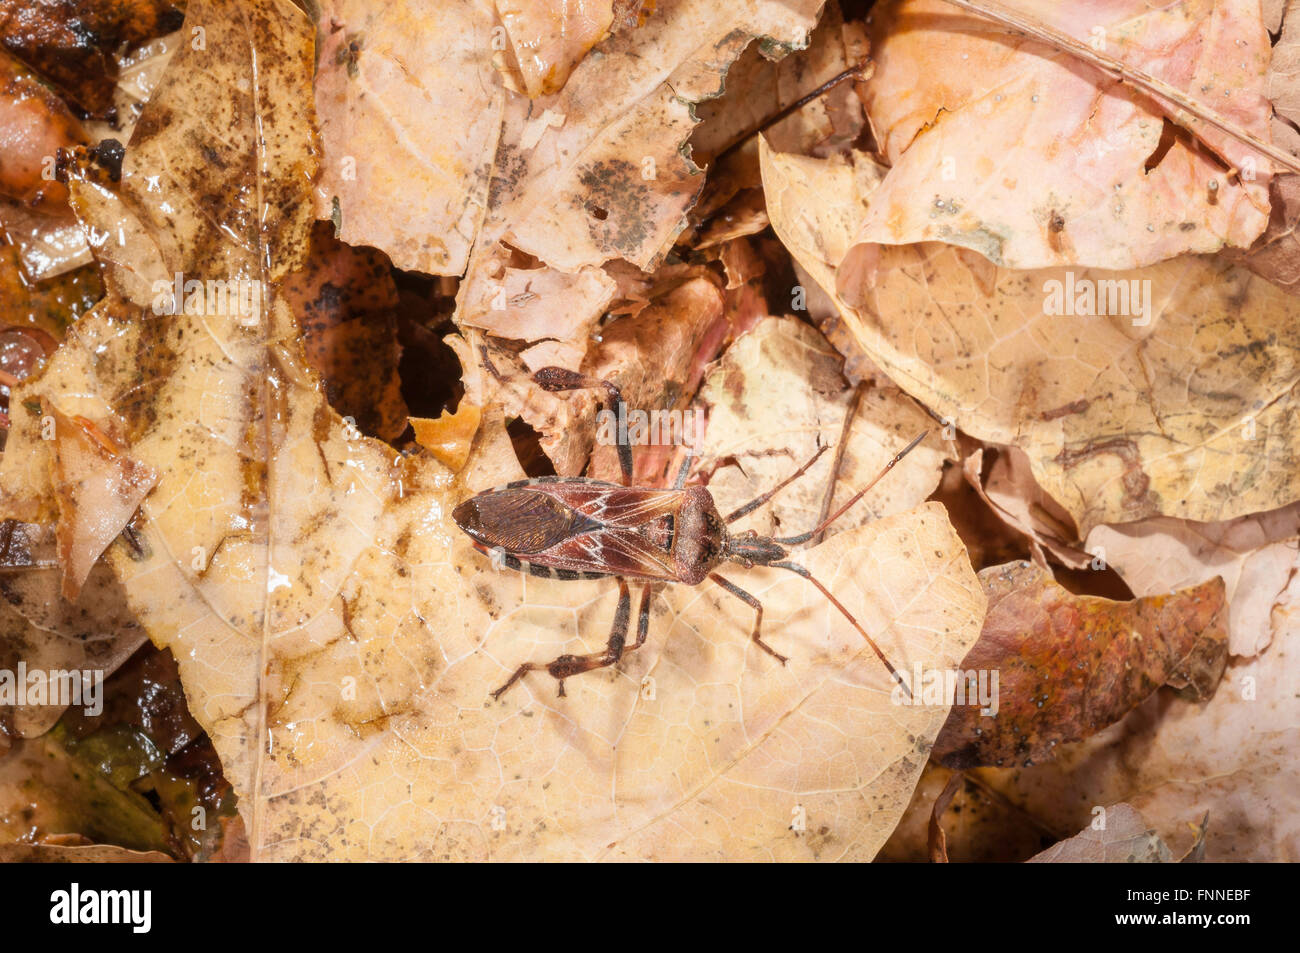 Western conifer seed bug, Leptoglossus occidentalis; native to western USA Stock Photo